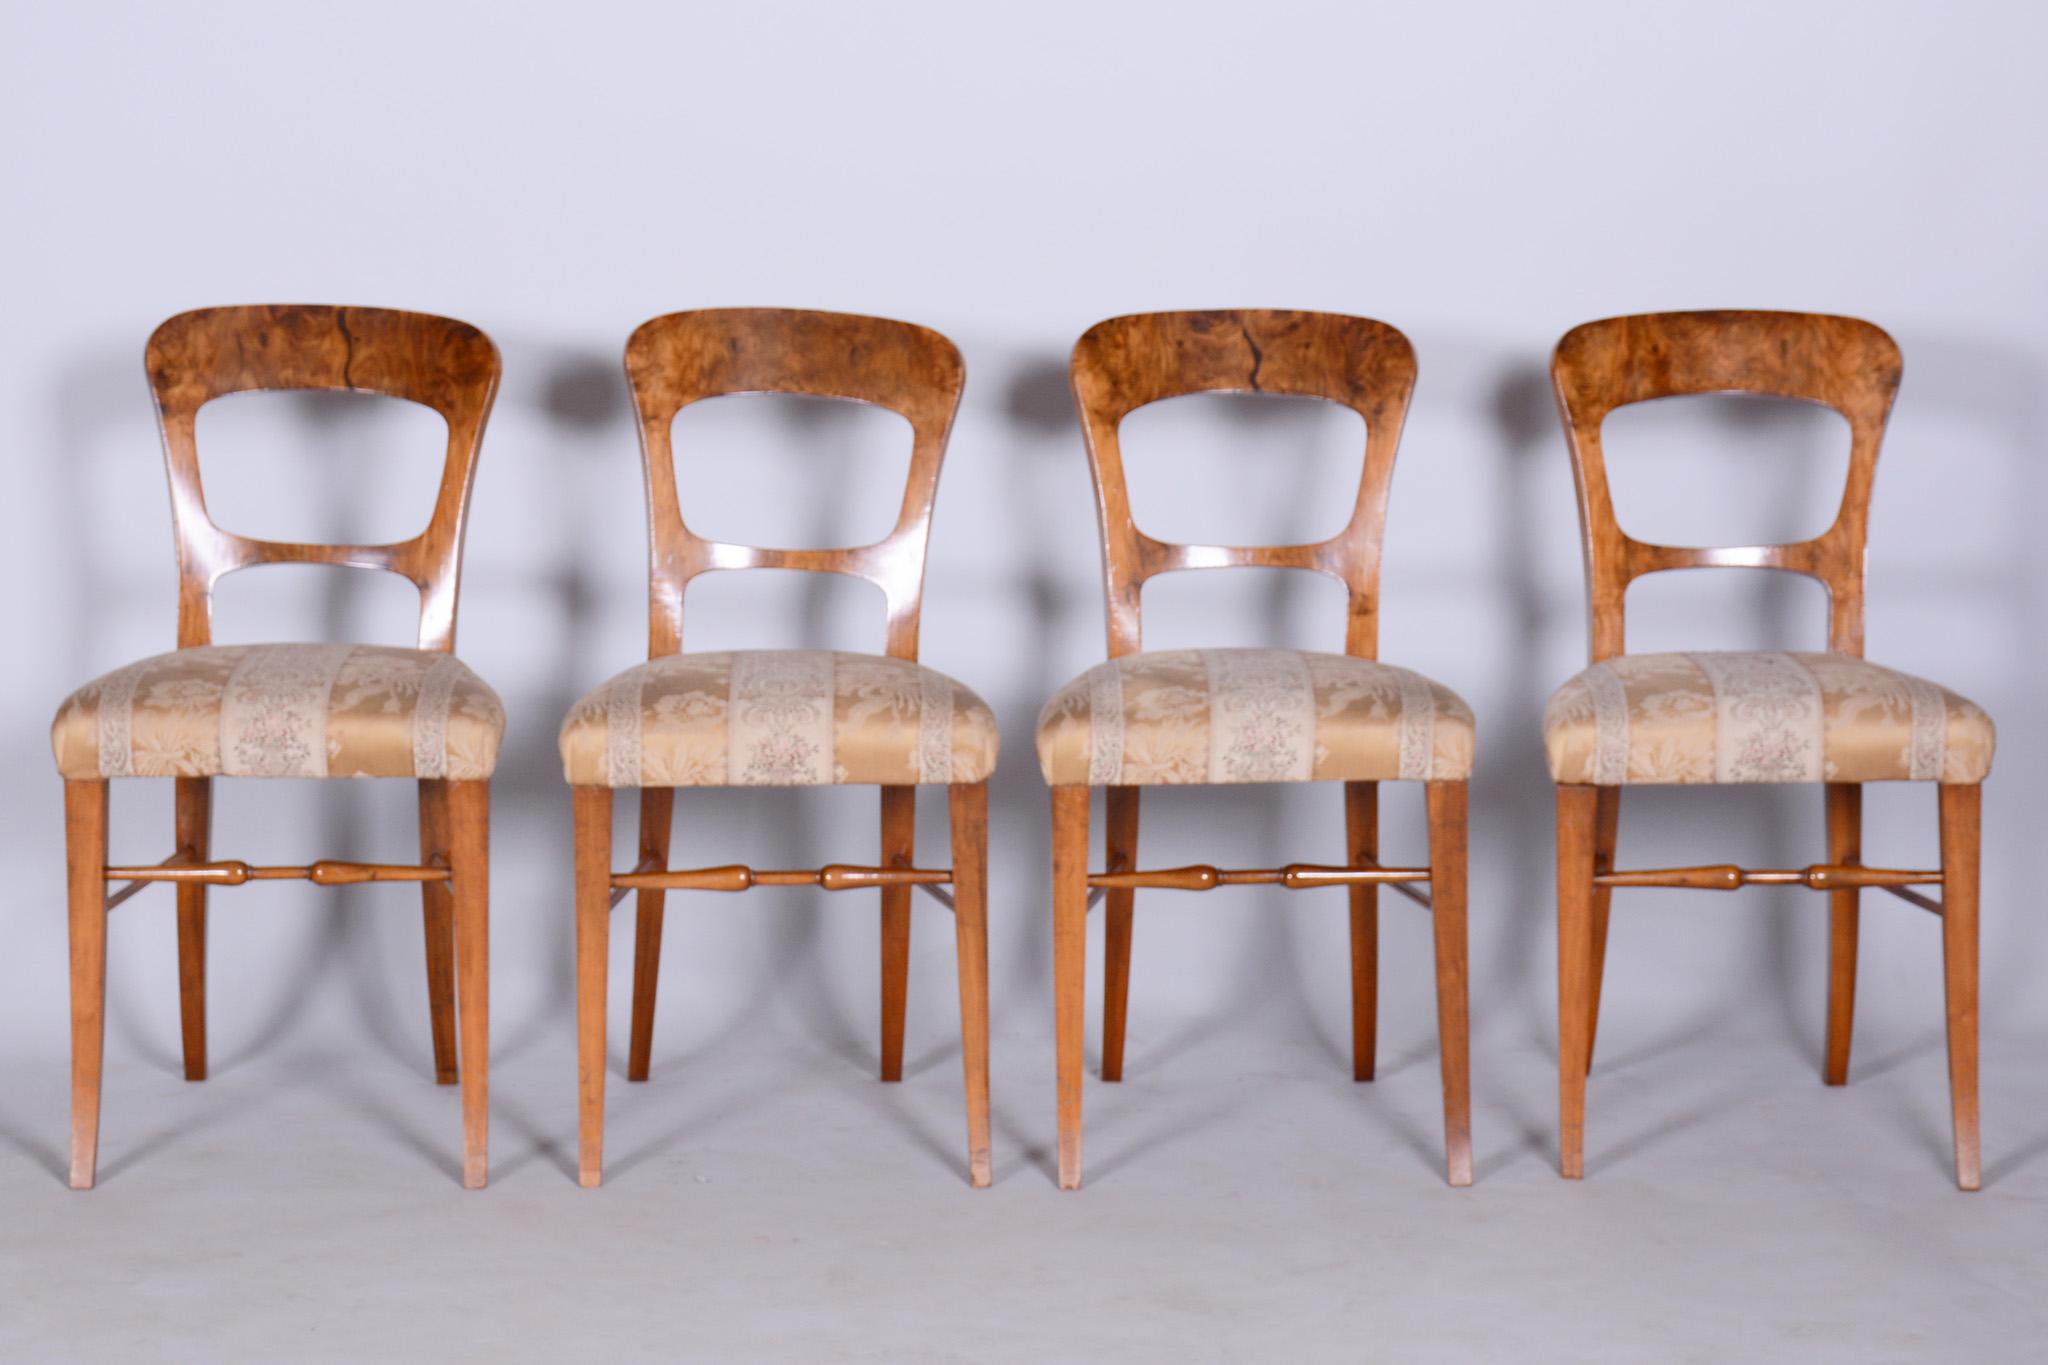 Set of four Biedermeier walnut chairs.

Source: Czechia
Period: 1830-1839
Material: Walnut, Fabric
Seat height: 50 cm / 19.69?

Very well-preserved original condition.
Professionally cleaned upholstery.
Solid and stable